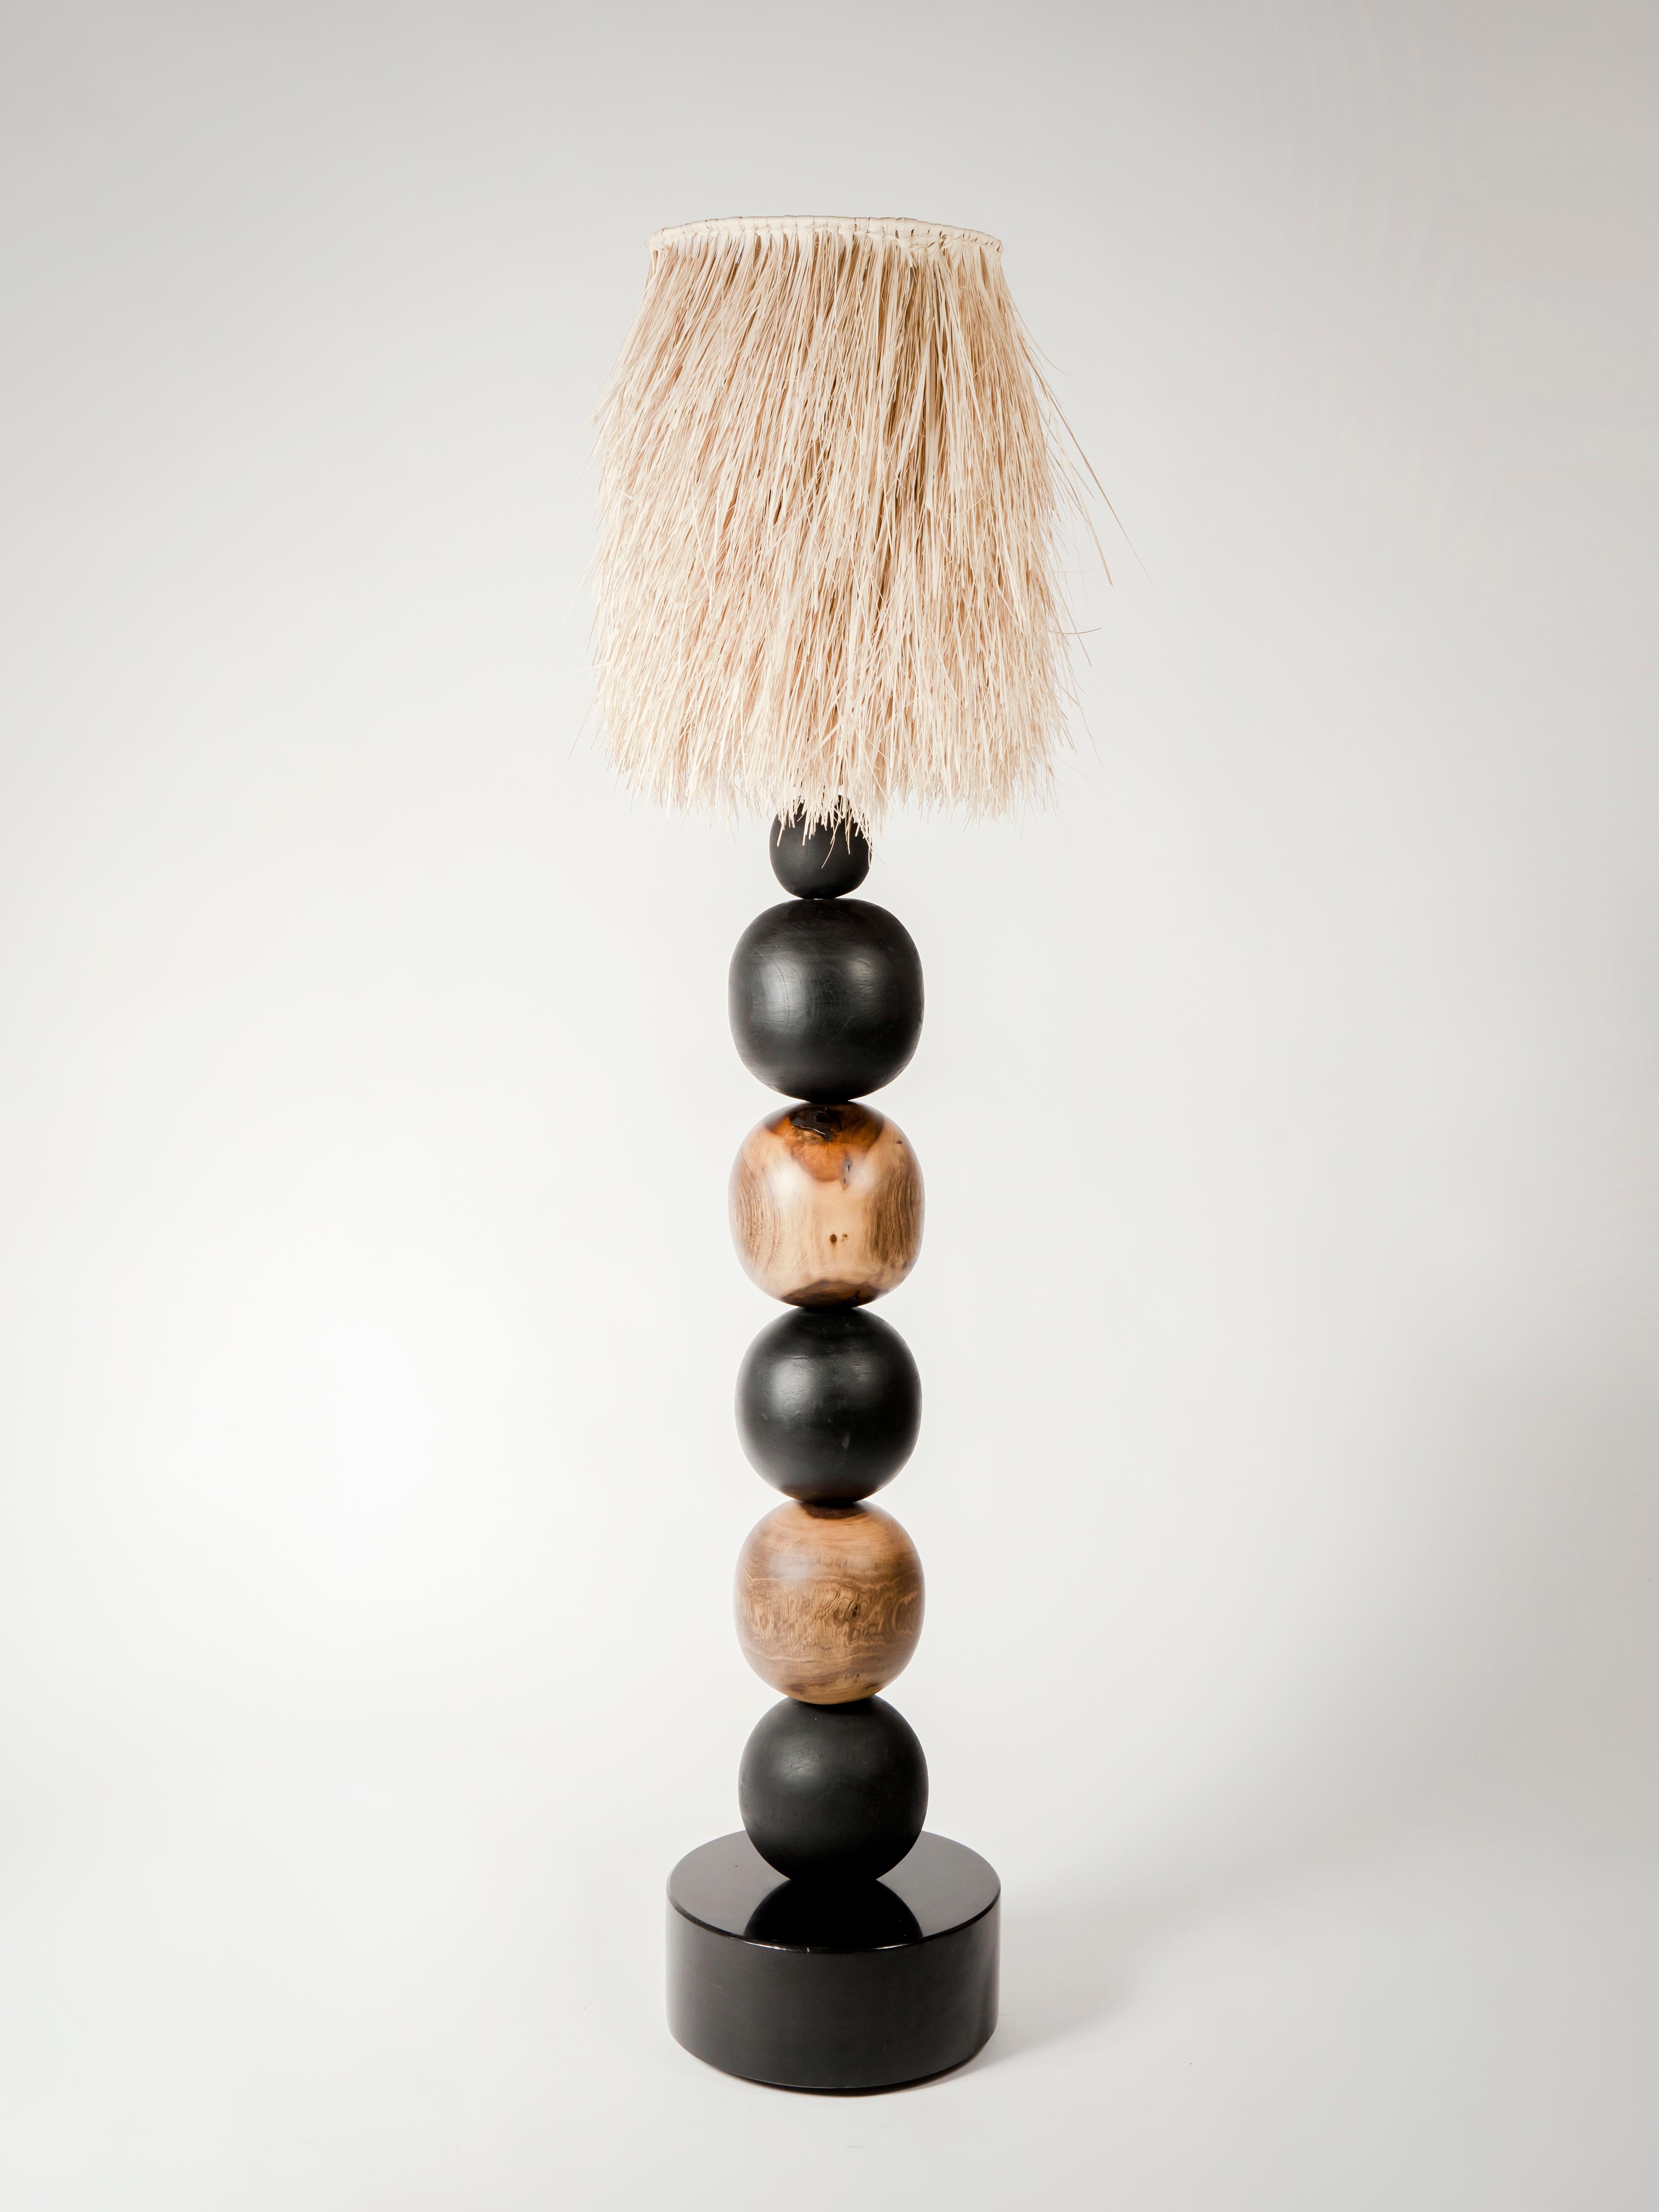 Wooden Spheres Floor Lamp with Palm Screen by Daniel Orozco.
Dimensions: D 35 x H 184 cm.
Materials: Jabin wood, burned wood, stone base, palm screen.

All our lamps can be wired according to each country. If sold to the USA it will be wired for